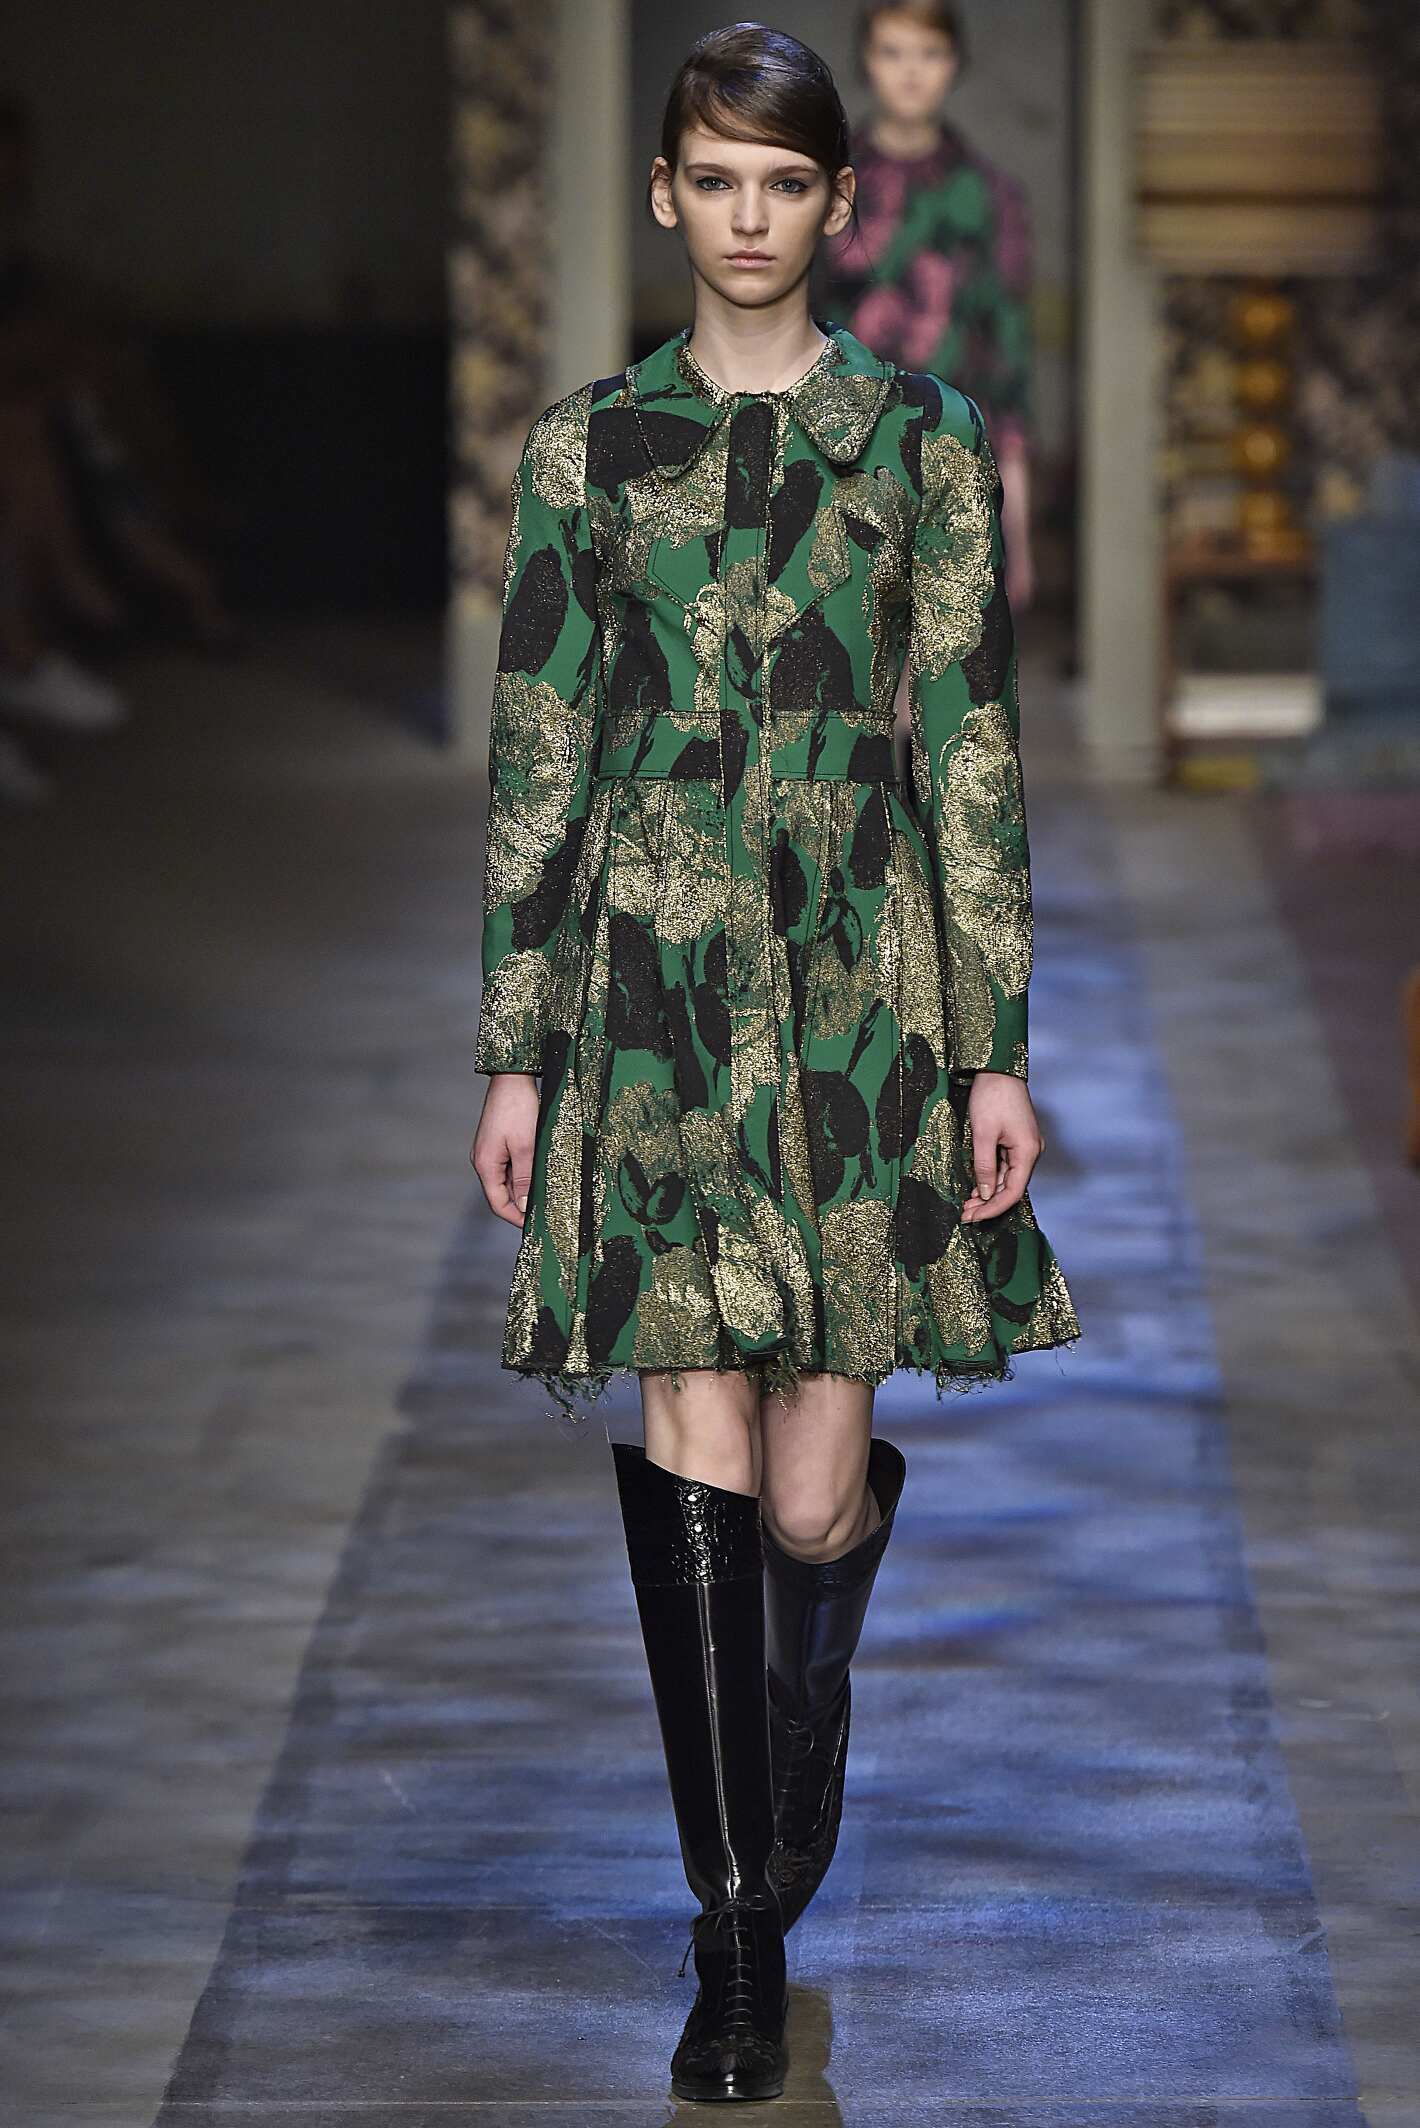 2016 Fall Fashion Woman Erdem Collection